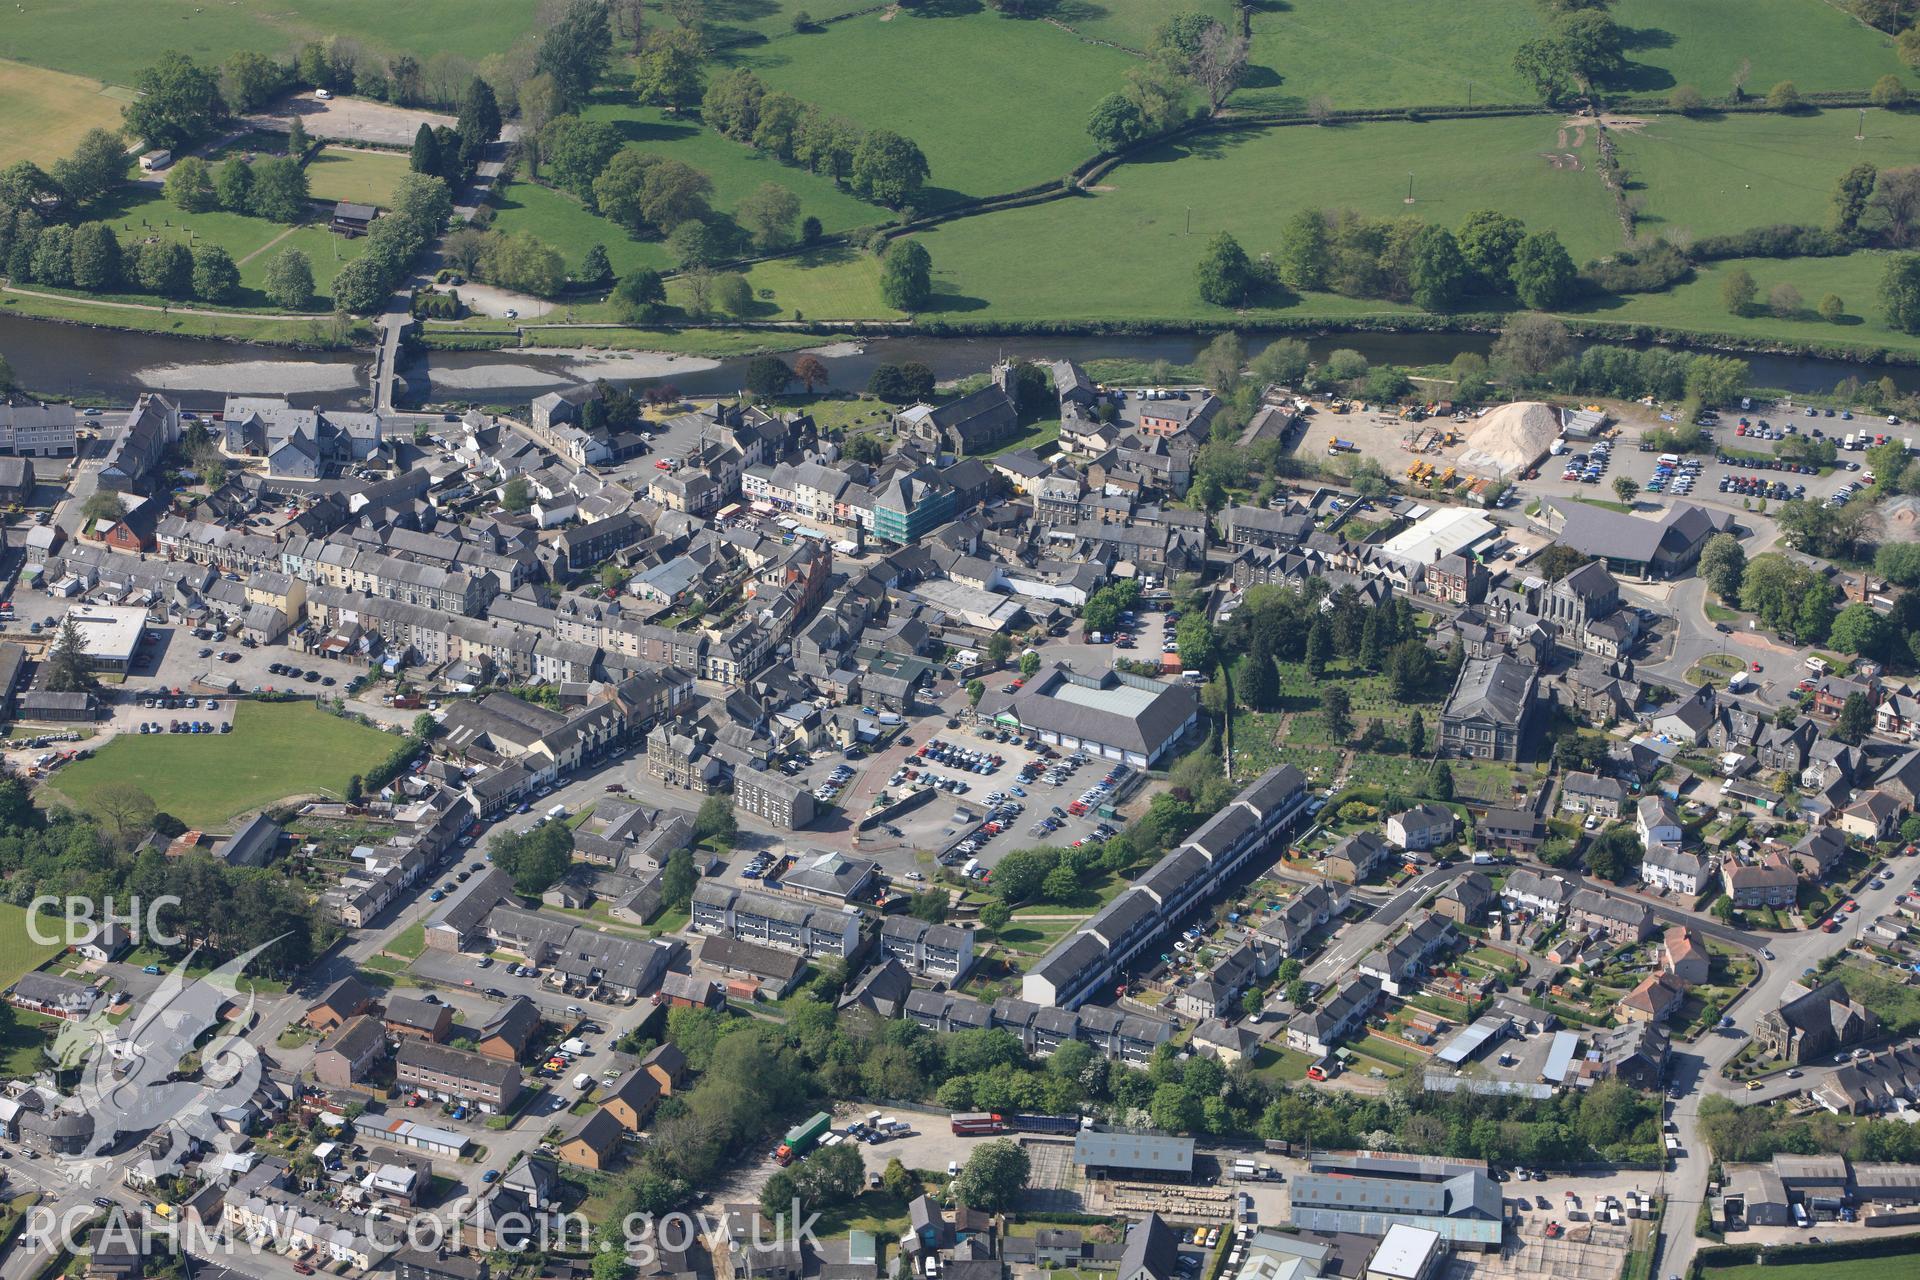 RCAHMW colour oblique photograph of Llanrwst town. Taken by Toby Driver on 03/05/2011.